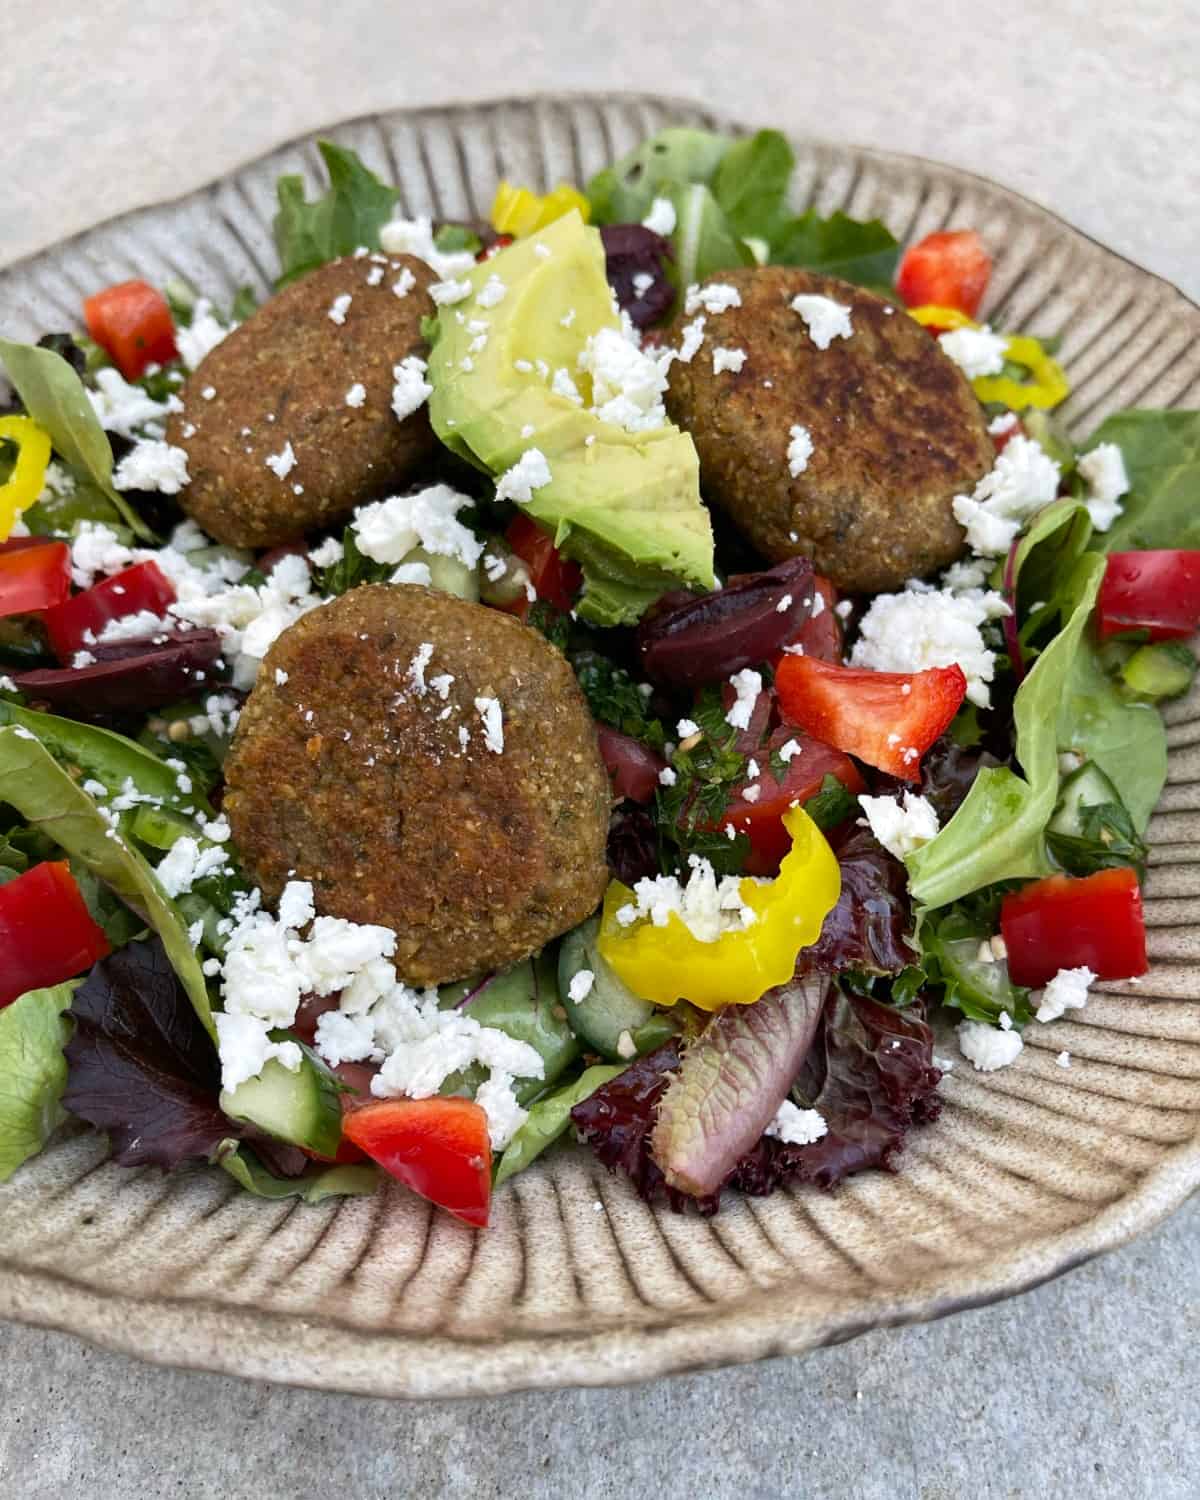 Tofu-falafel salad on bed of mixed greens with sliced avocado, Kalamata olives, chopped red bell pepper, yellow banana pepper rings and crumbled feta cheese.